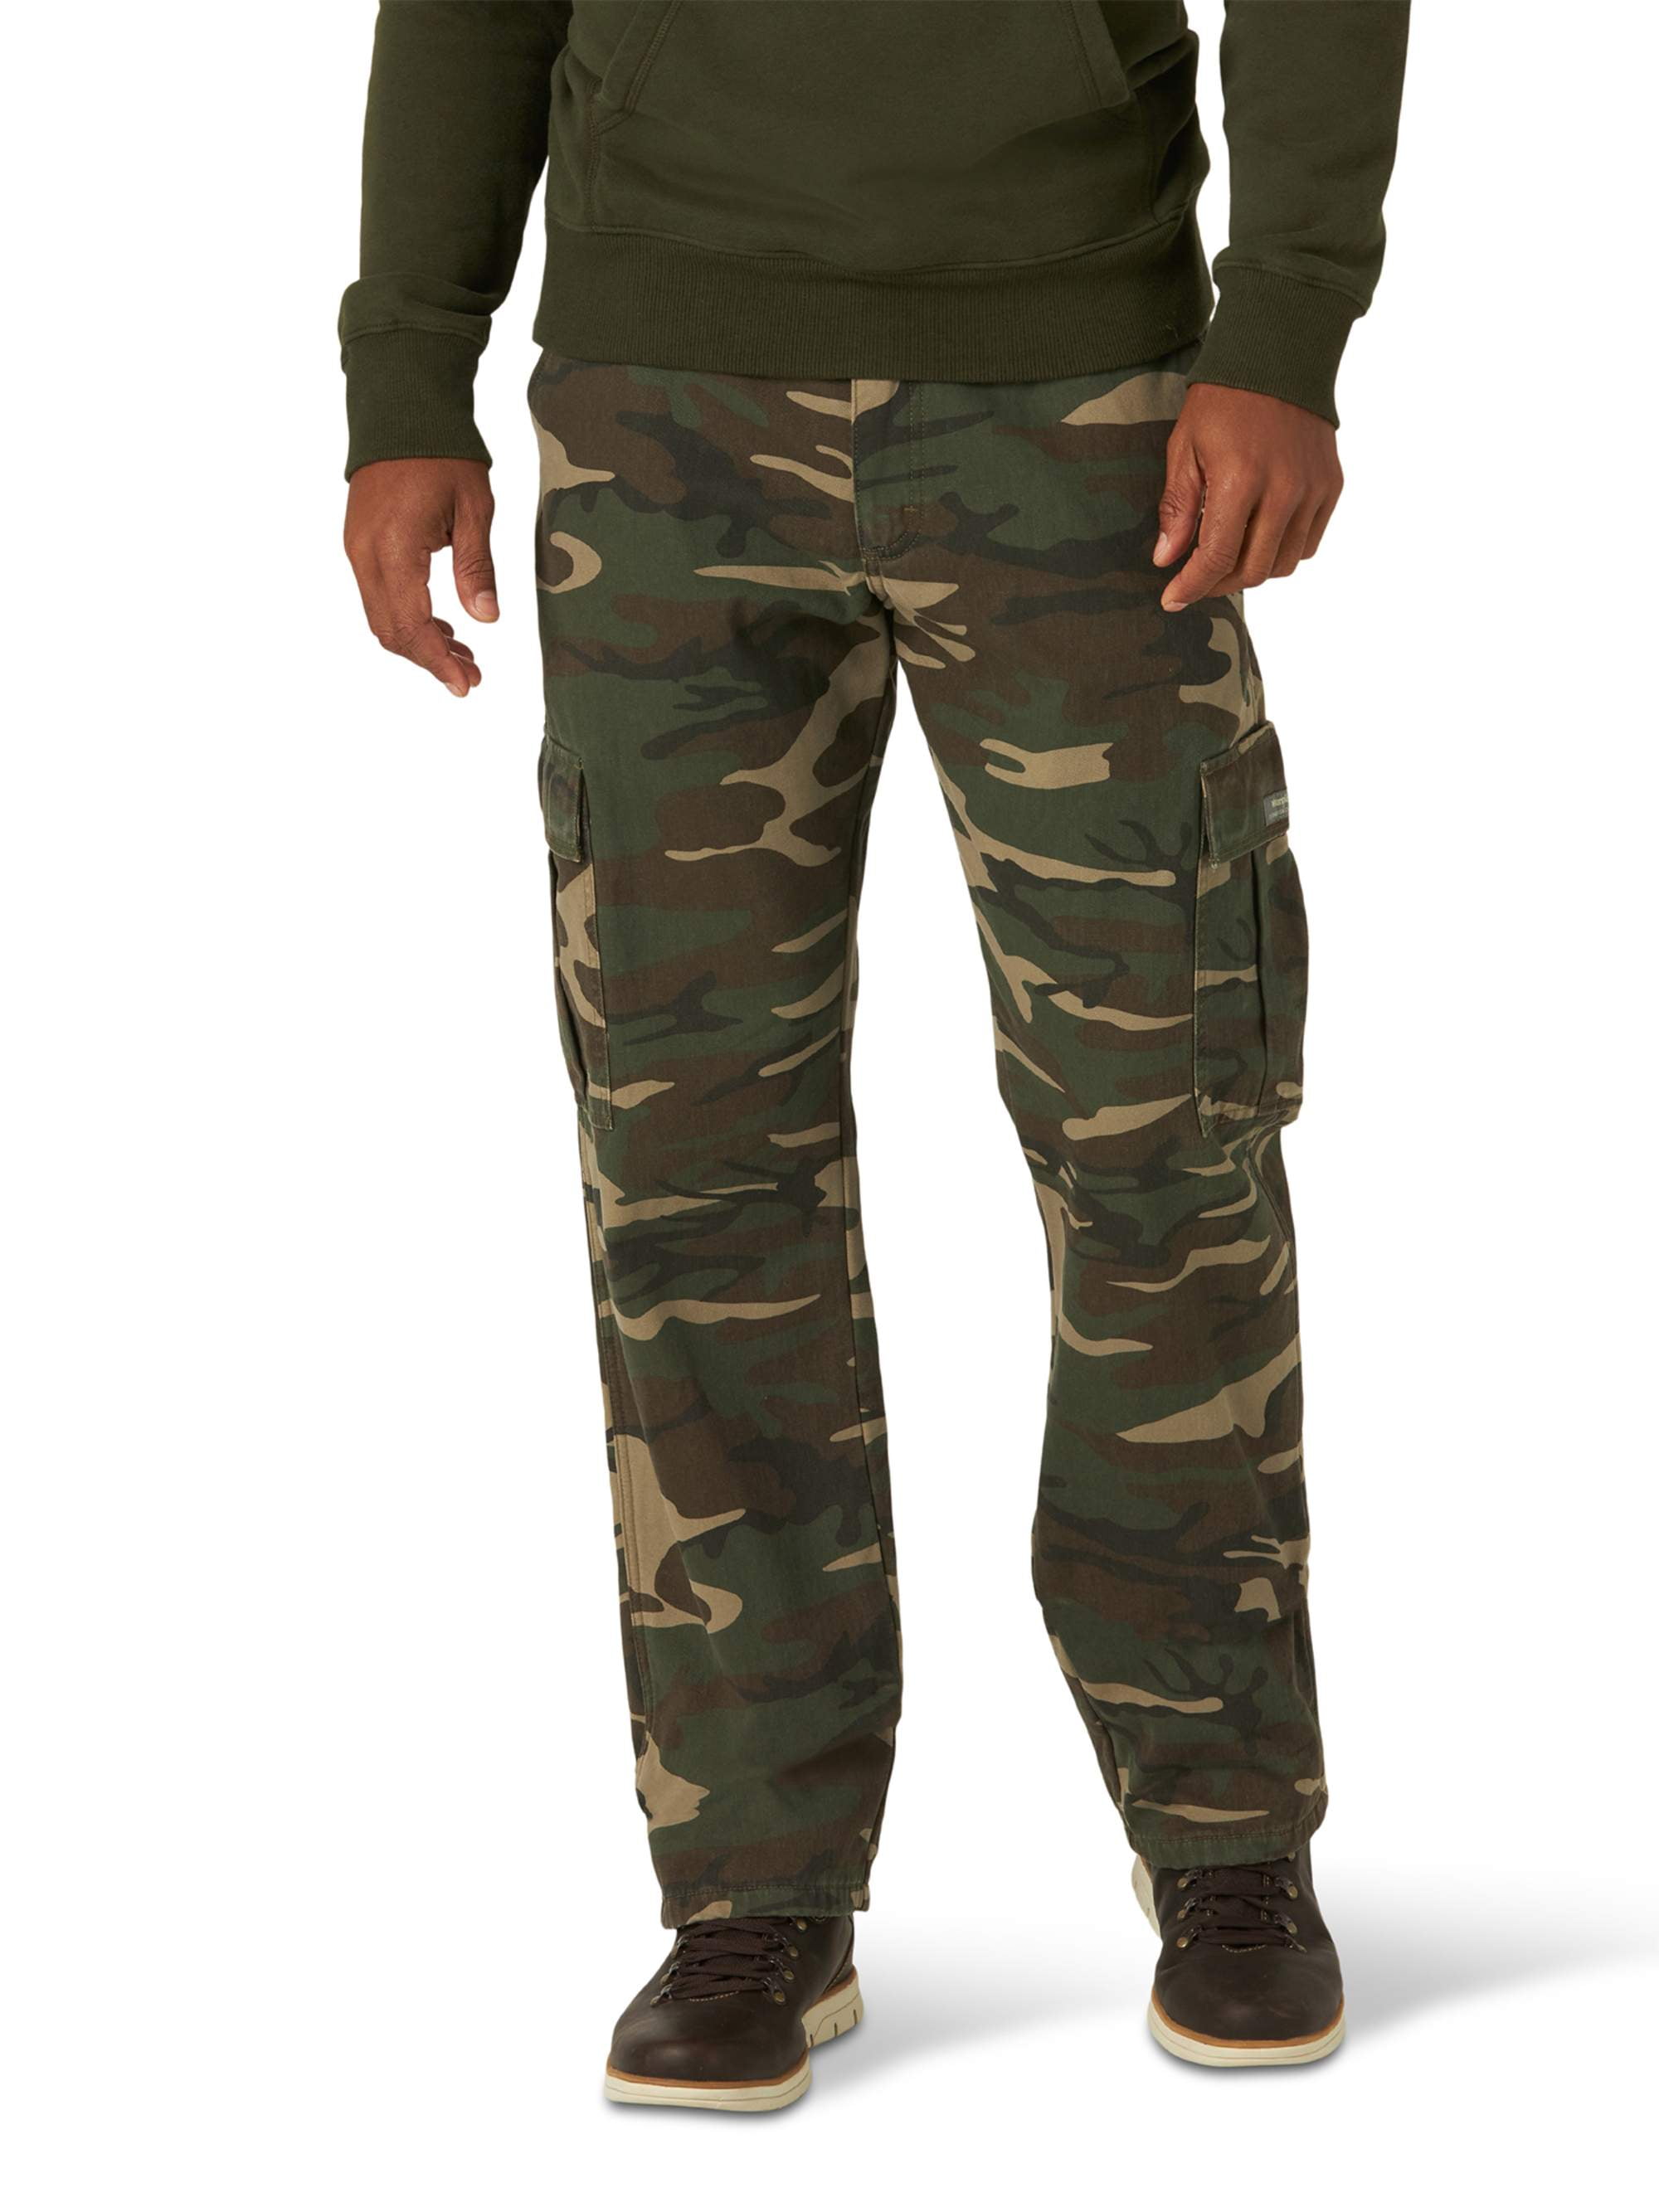 thermal lined camo jeans